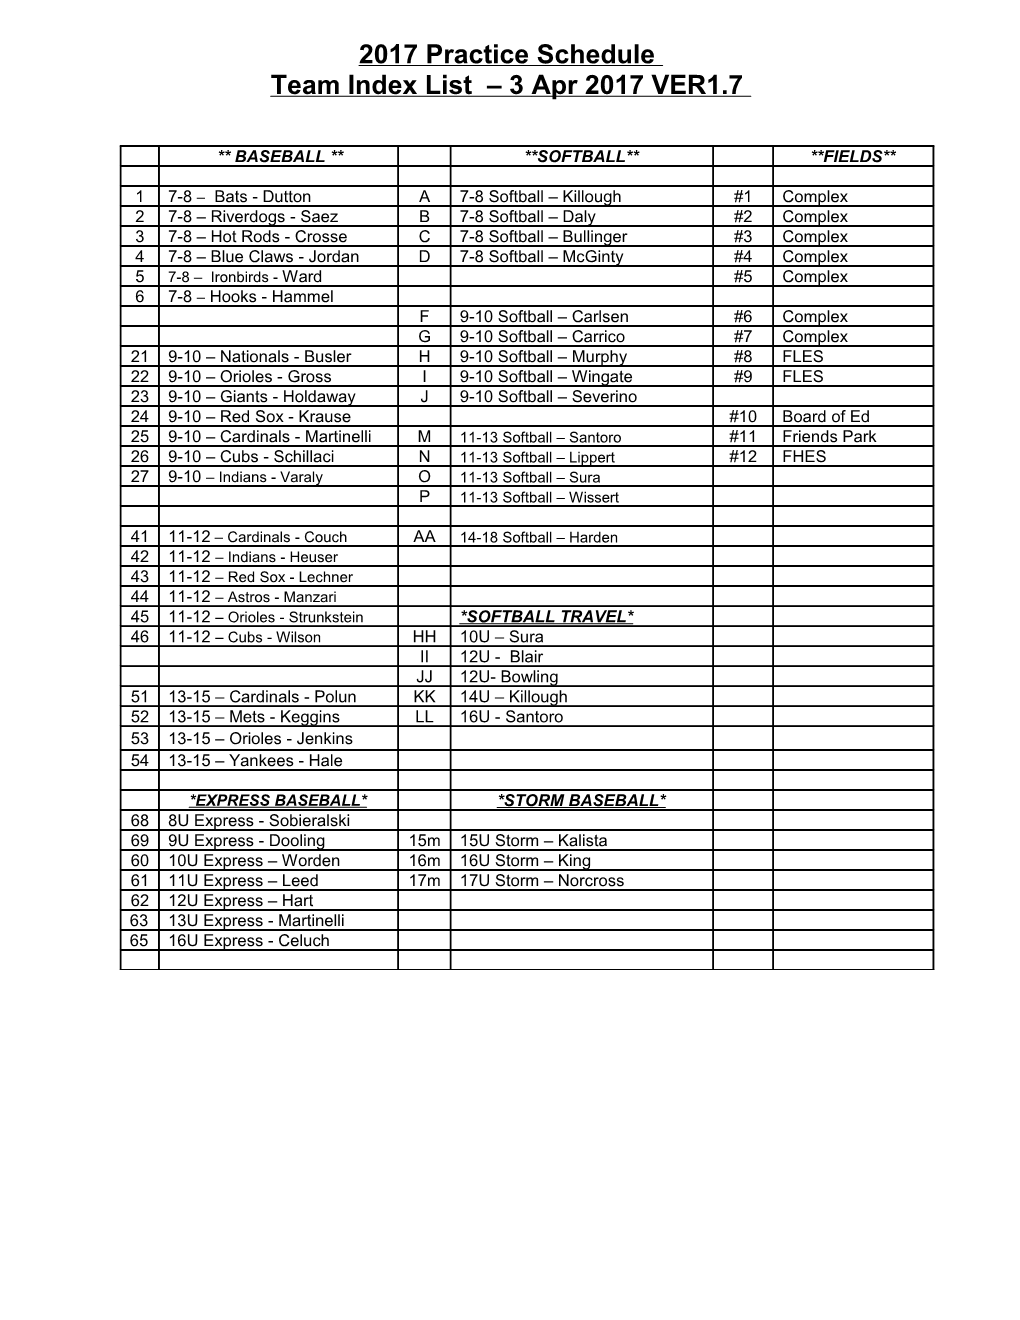 Team & Field Assignments s1